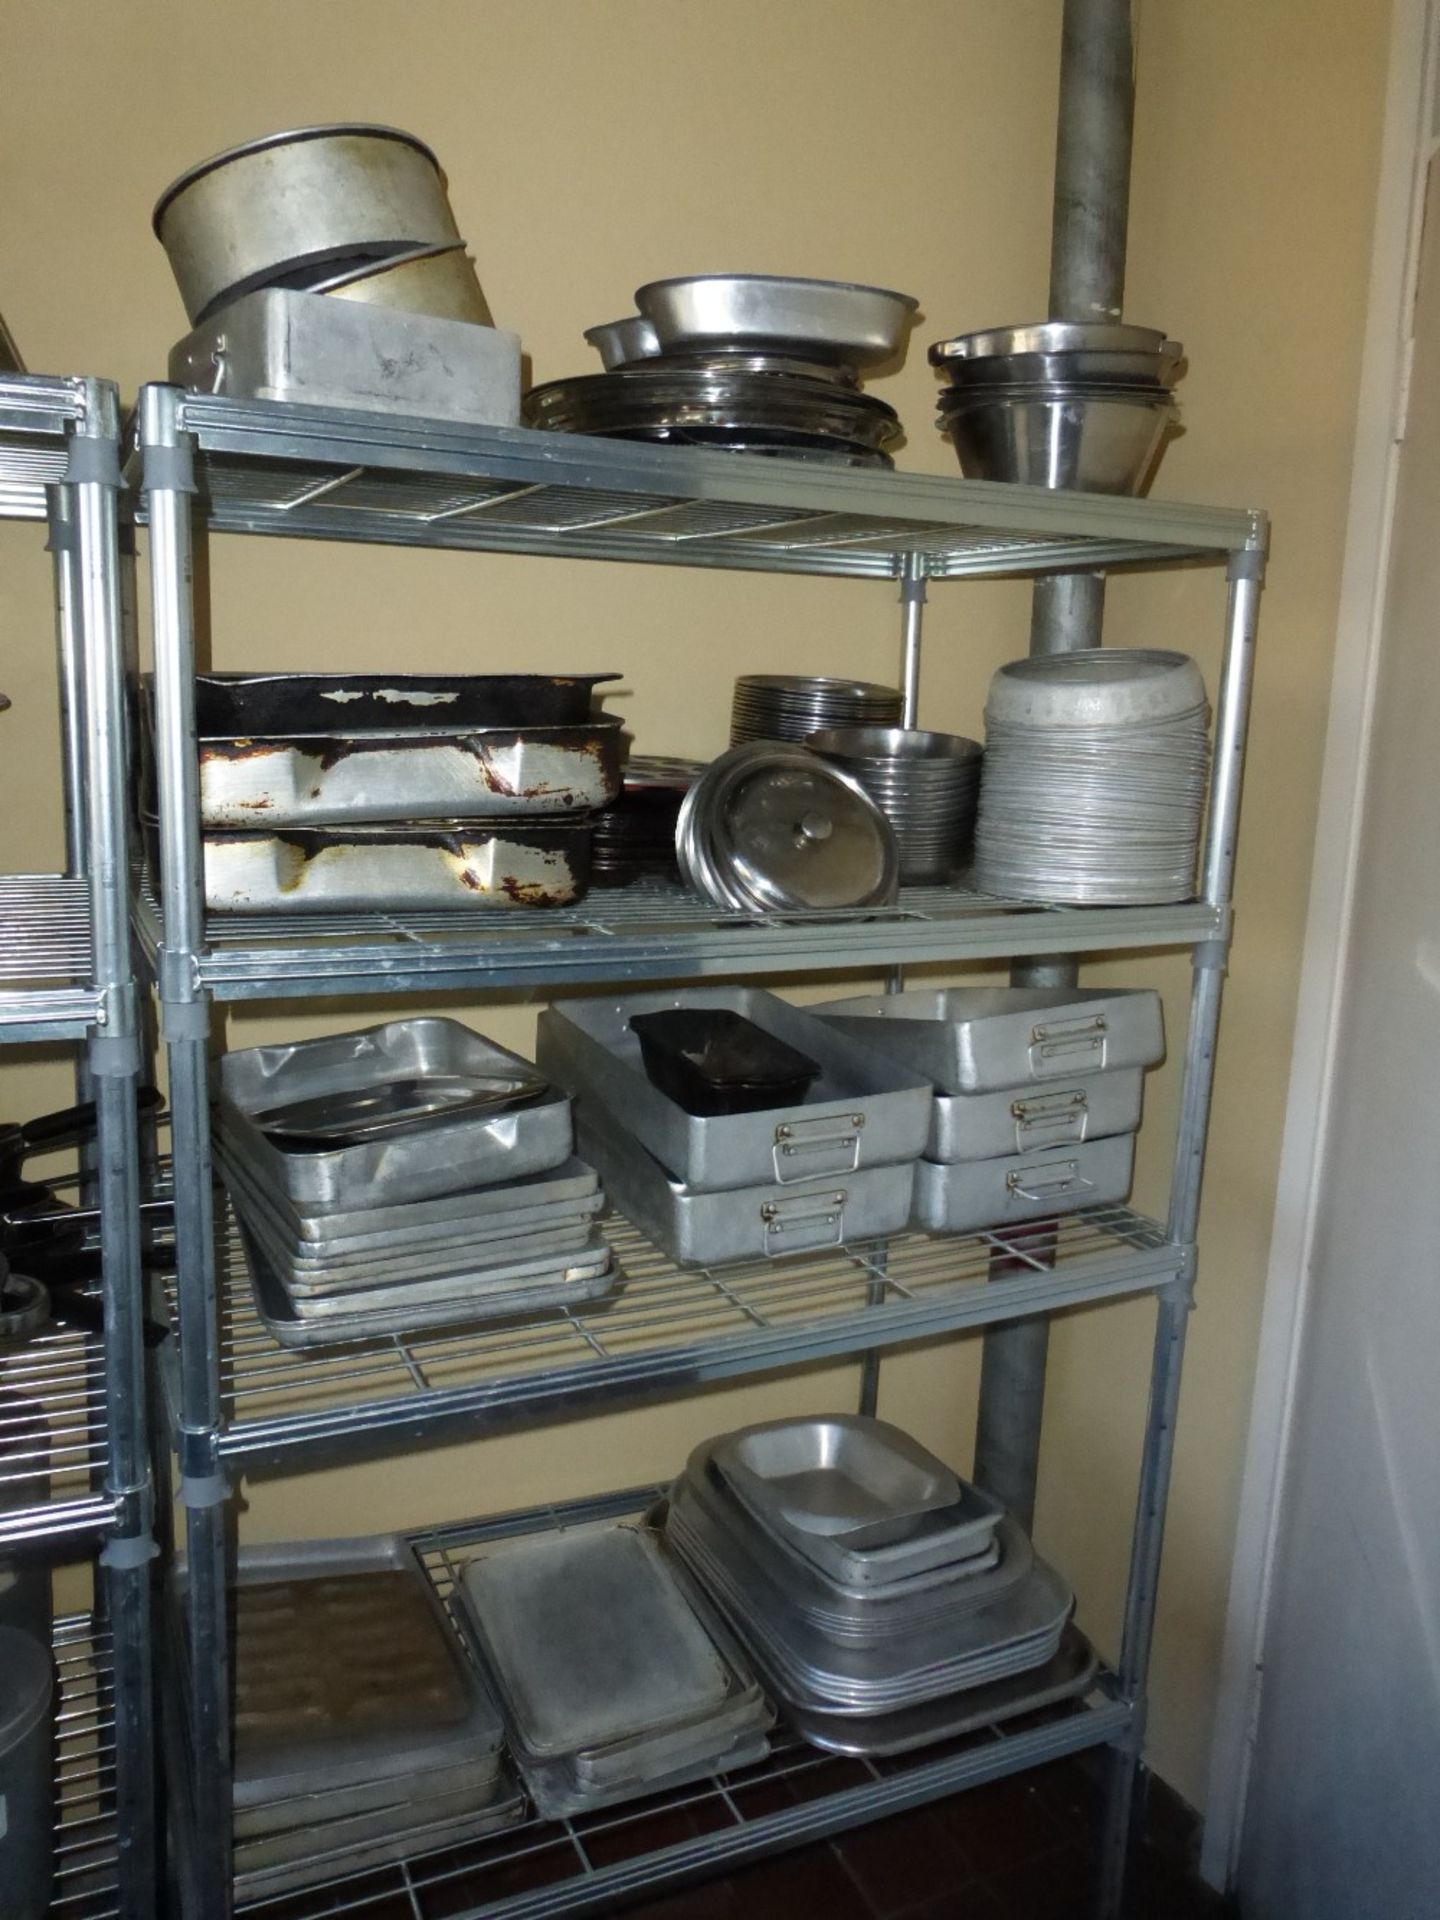 3 metal four tier racks and a large quantity of miscellaneous aluminium pans, colanders, bins and - Image 3 of 4